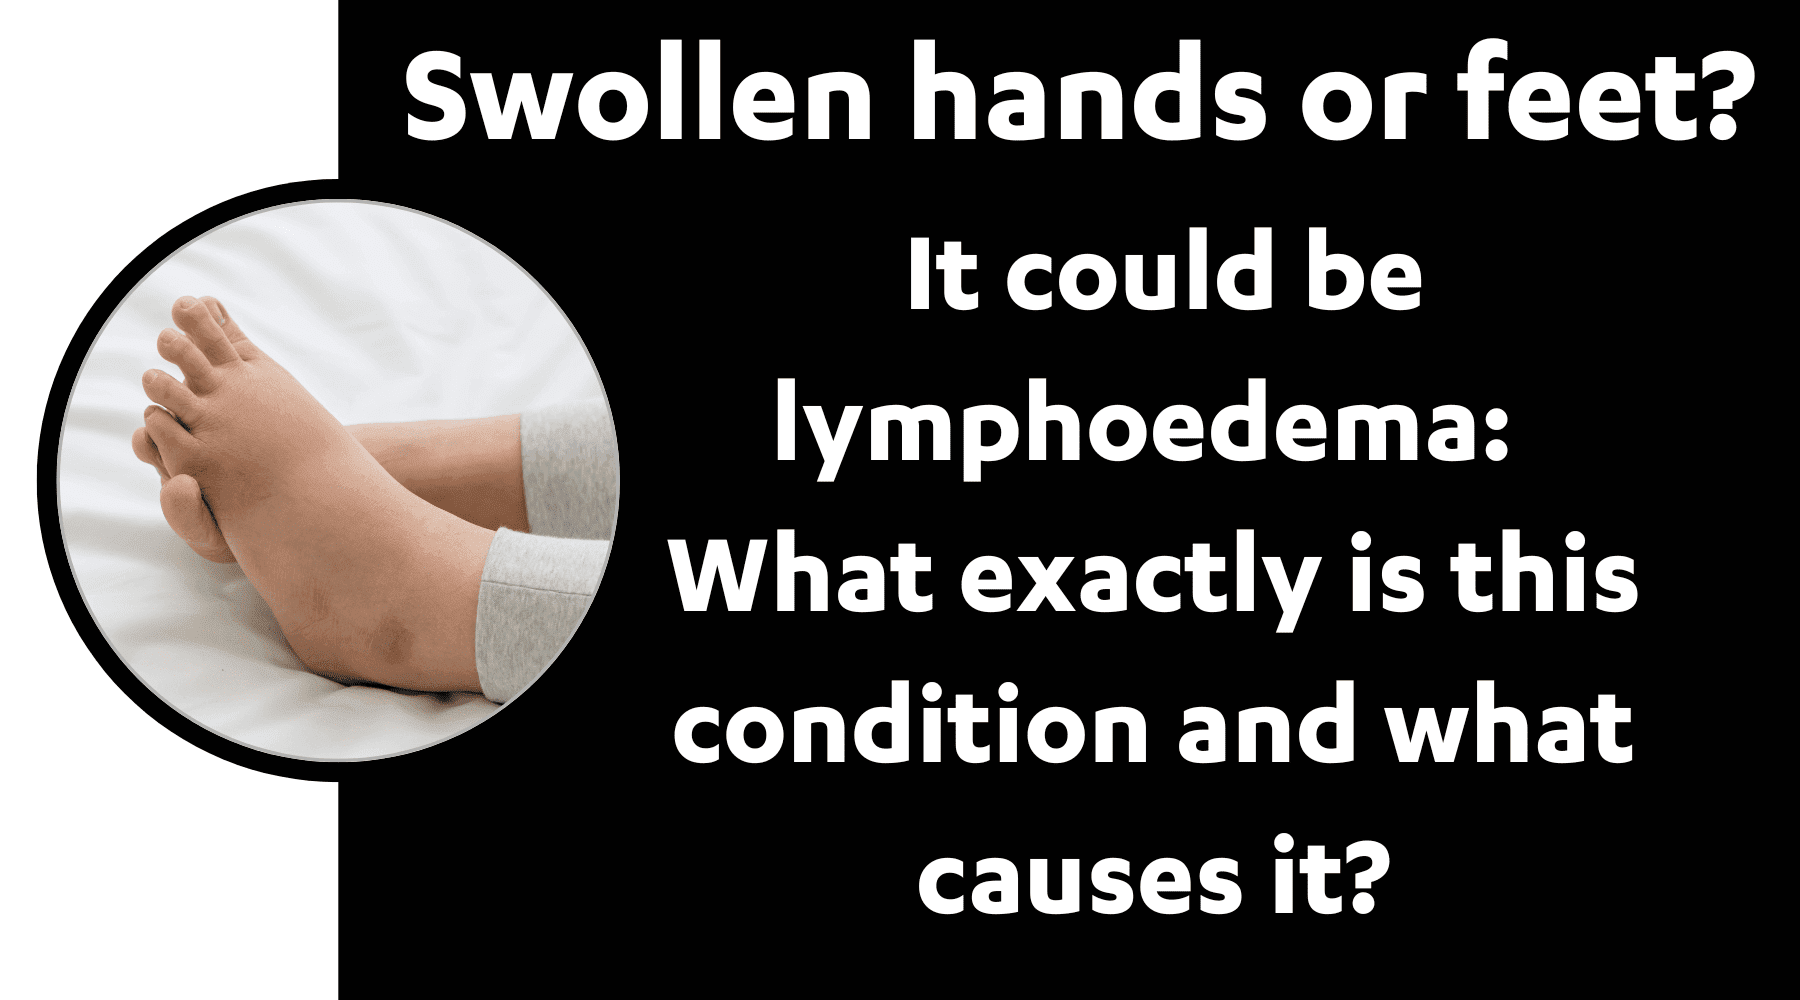 Swollen hands or legs? It could be Lymphoedema: What exactly is this condition and what causes it? - Dr Kez Chirolab 